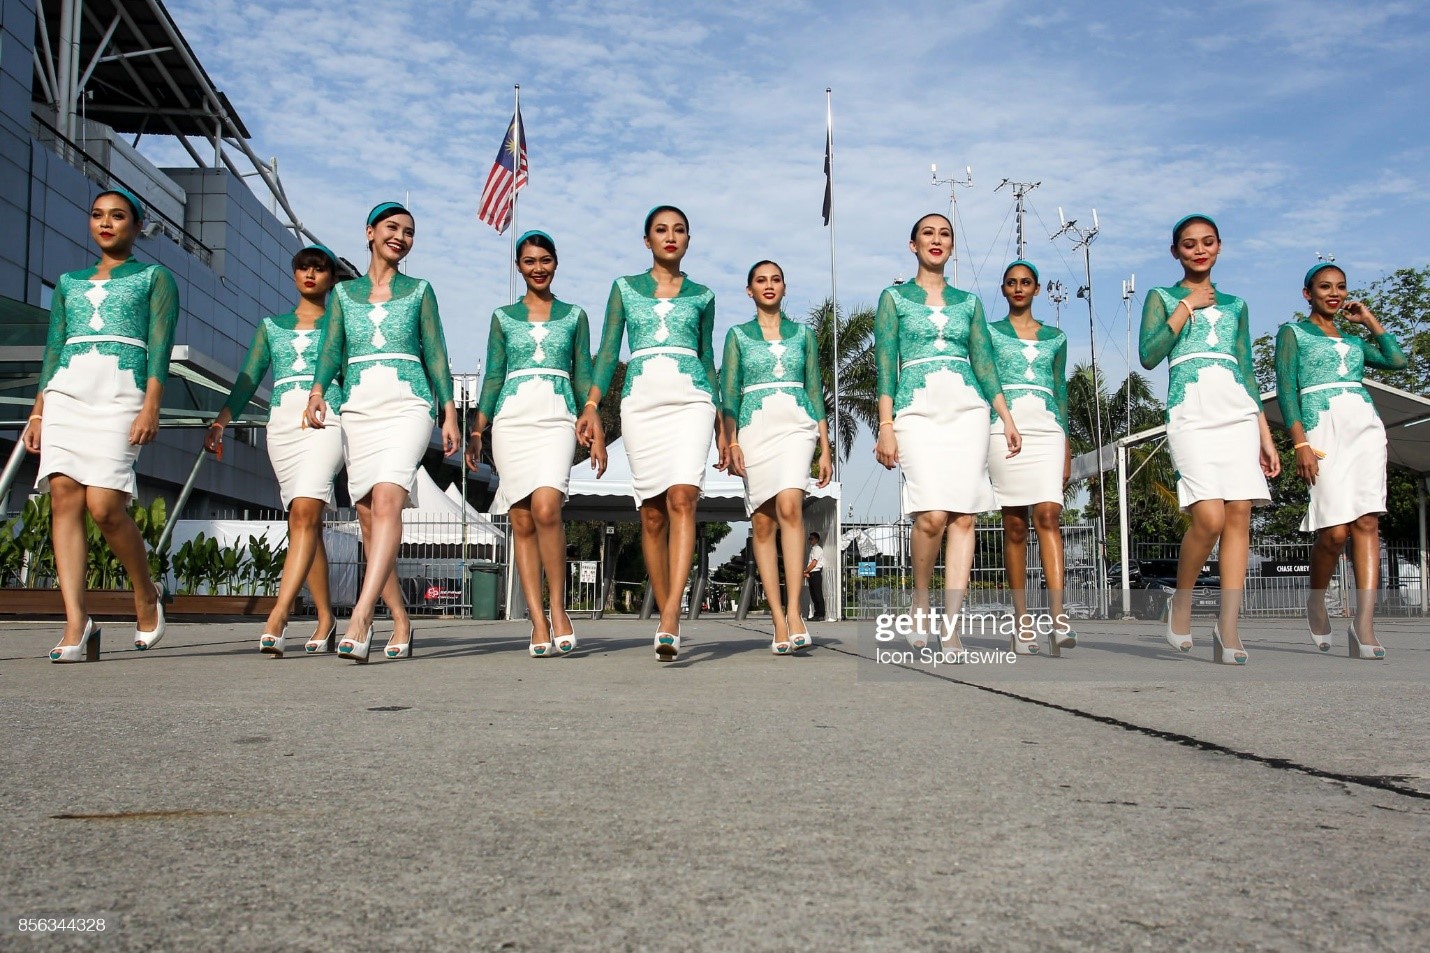 Grid girls pose for photograph before the start of the race of the Formula 1 Malaysia Grand Prix held at Sepang International Circuit in Sepang, Malaysia, on October 01, 2017. 